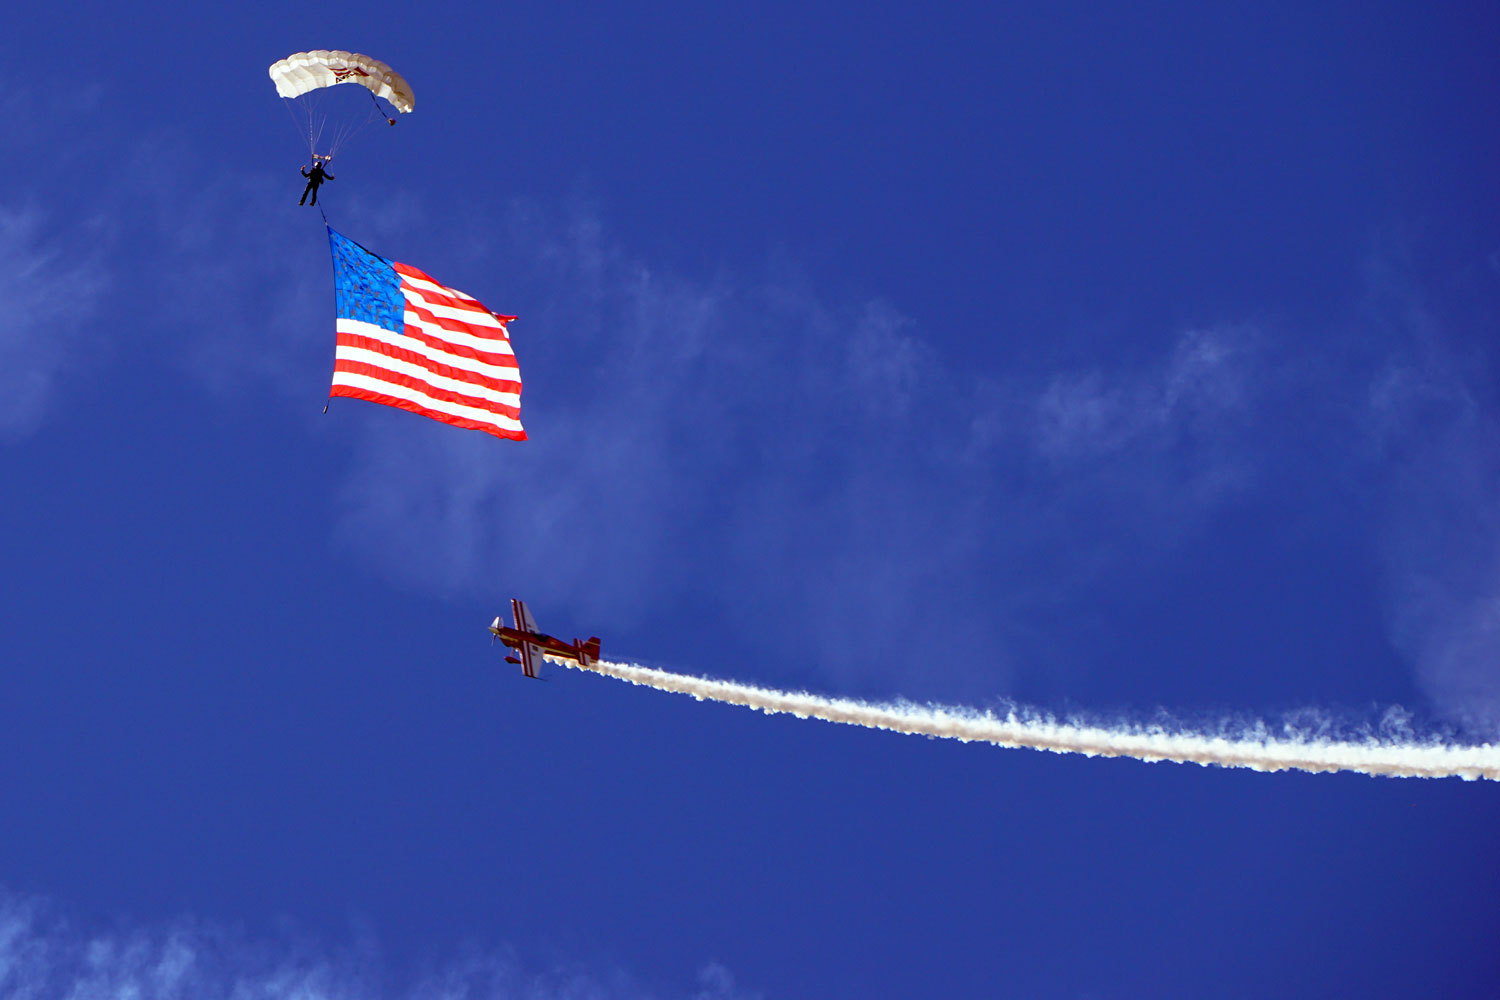 Skydiver Rex Pemberton presents the colors, as his wife, Melissa Pemberton (’13, PC/WW), circles his descent in her aircraft. (Alan Cesar photo)